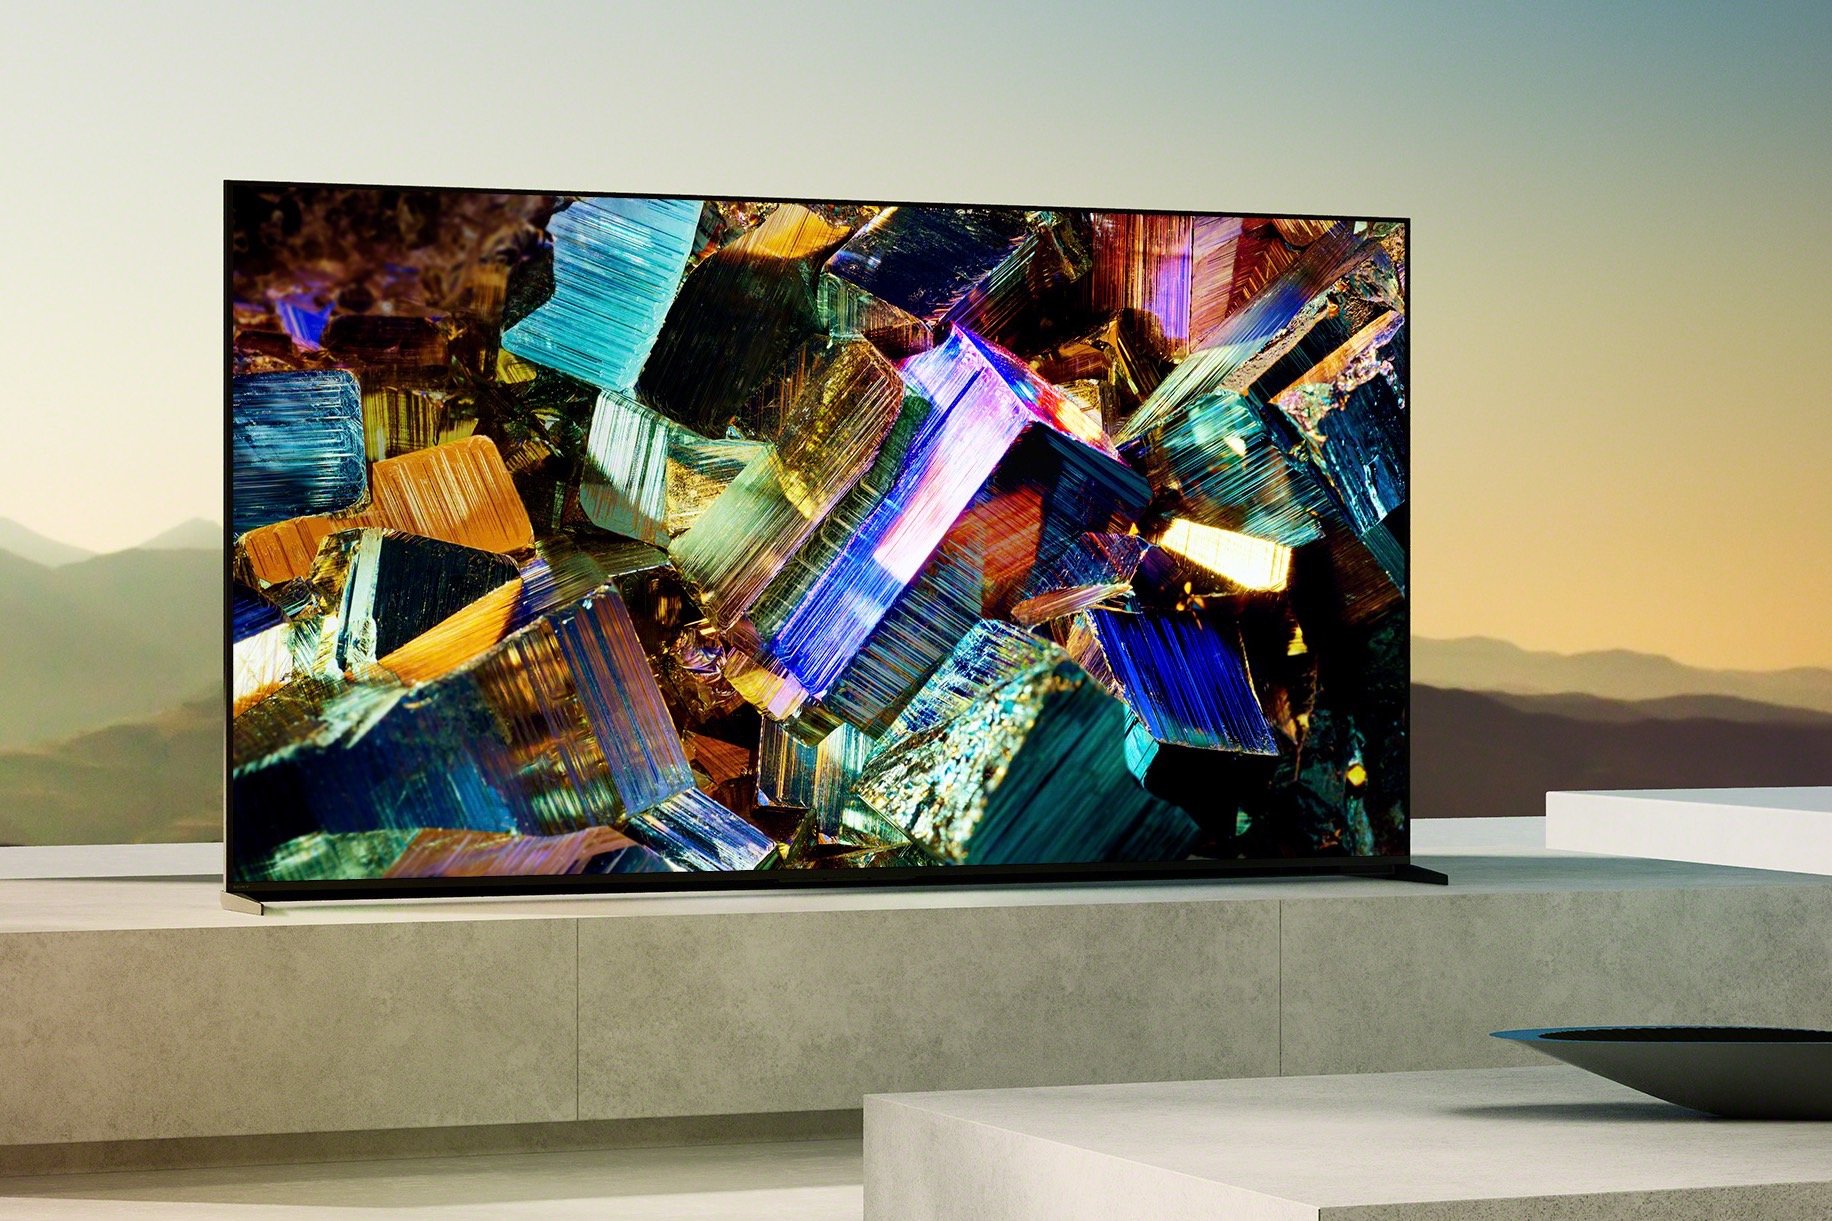 QD-OLED, mini-LED, and 8K: These are the best TVs of CES 2022